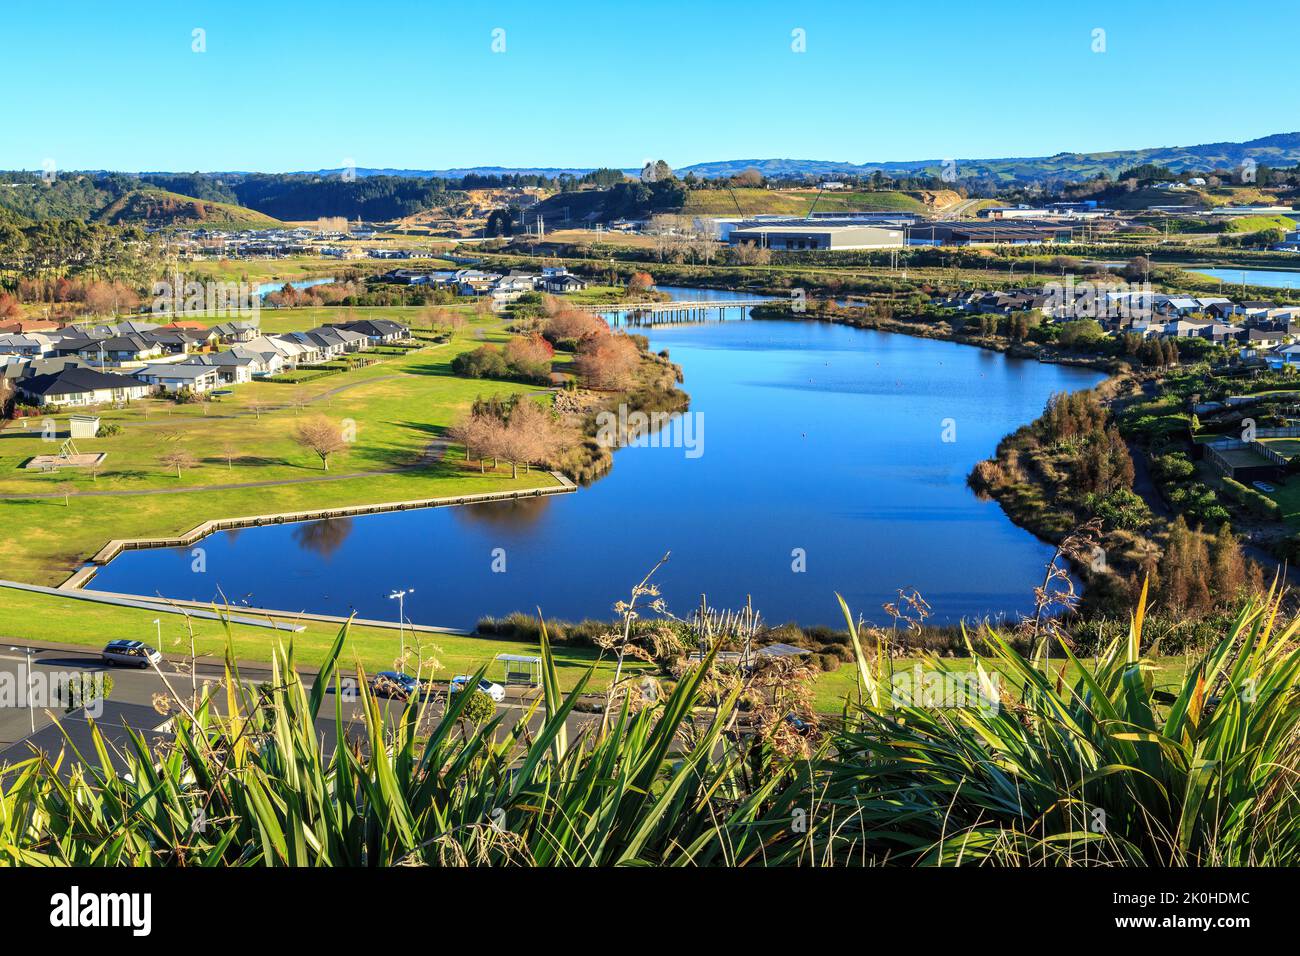 Urban planning with green spaces and water features. A view of 'The Lakes', a suburb of Tauranga, New Zealand Stock Photo